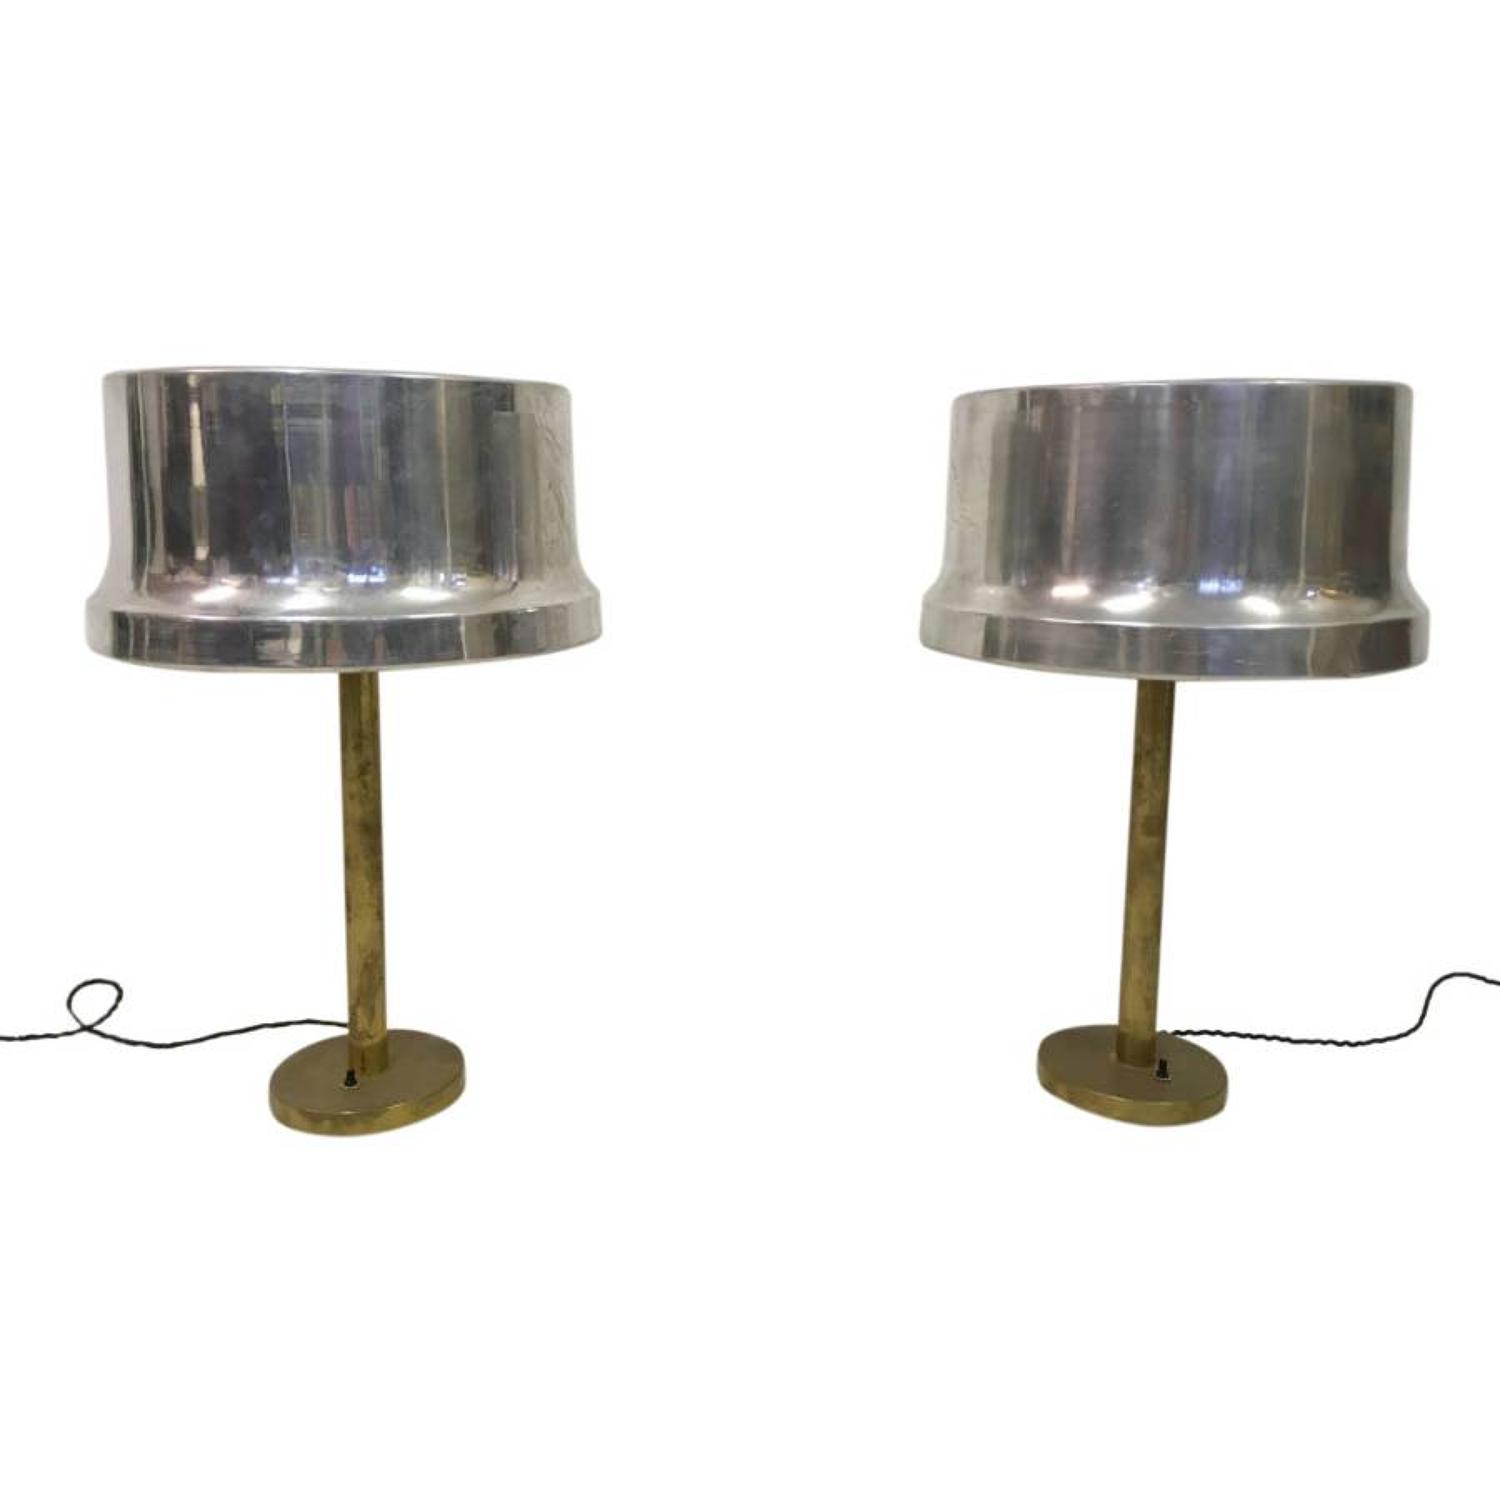 A pair of 1960s brass and aluminium table lamps